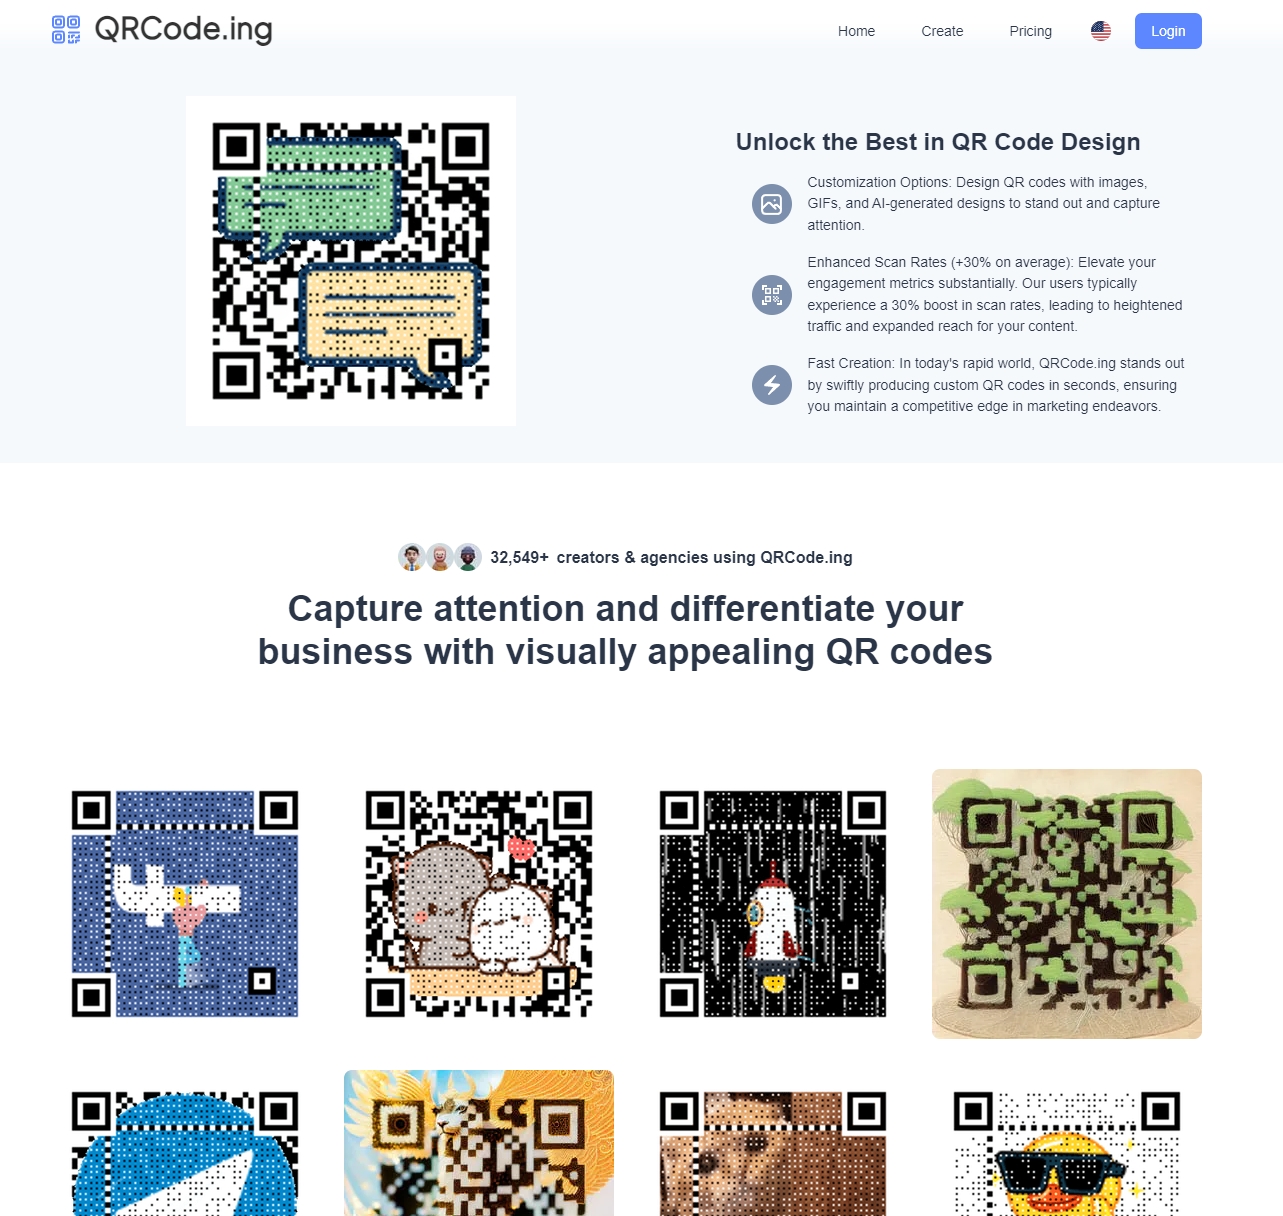 QRCode.ing Home page2